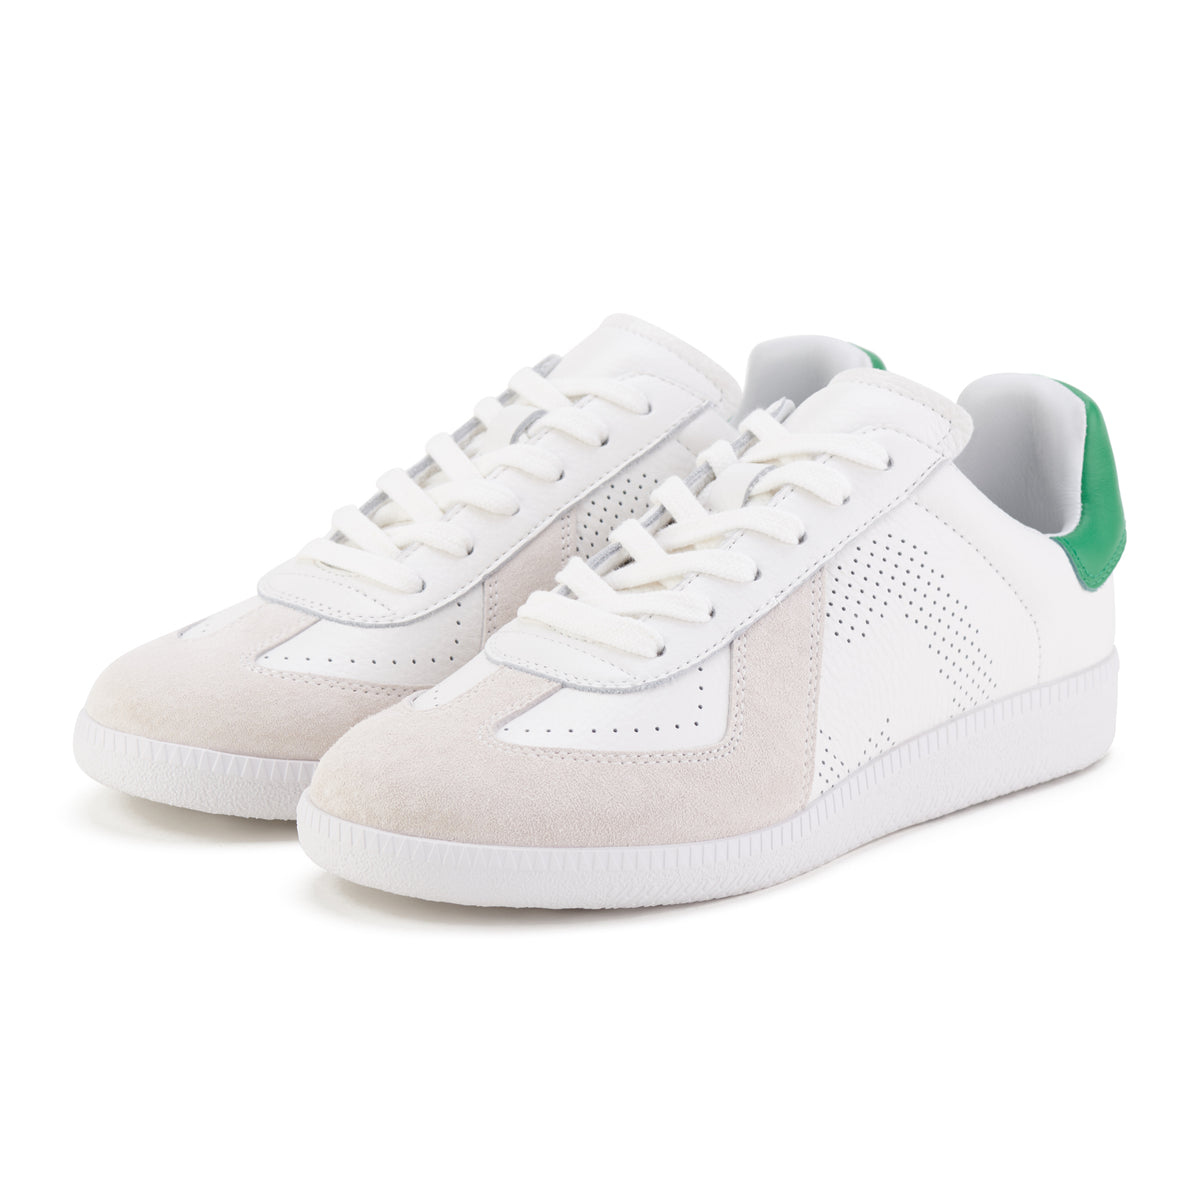 Pace White/Green